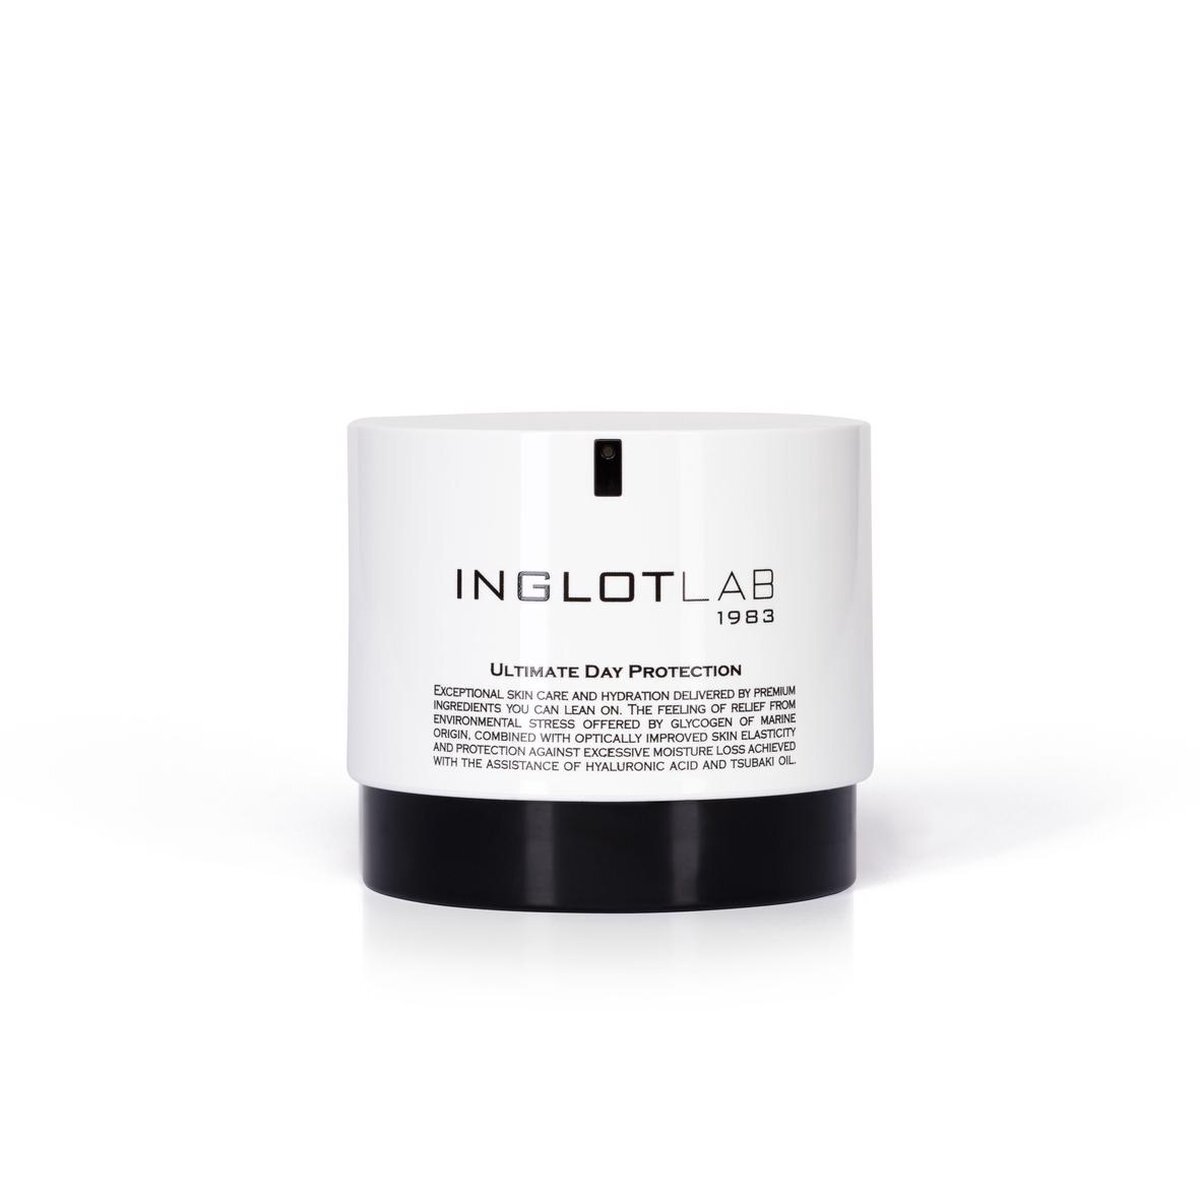 Inglot Lab Ultimat Day Protection Face Cream 50 Ml